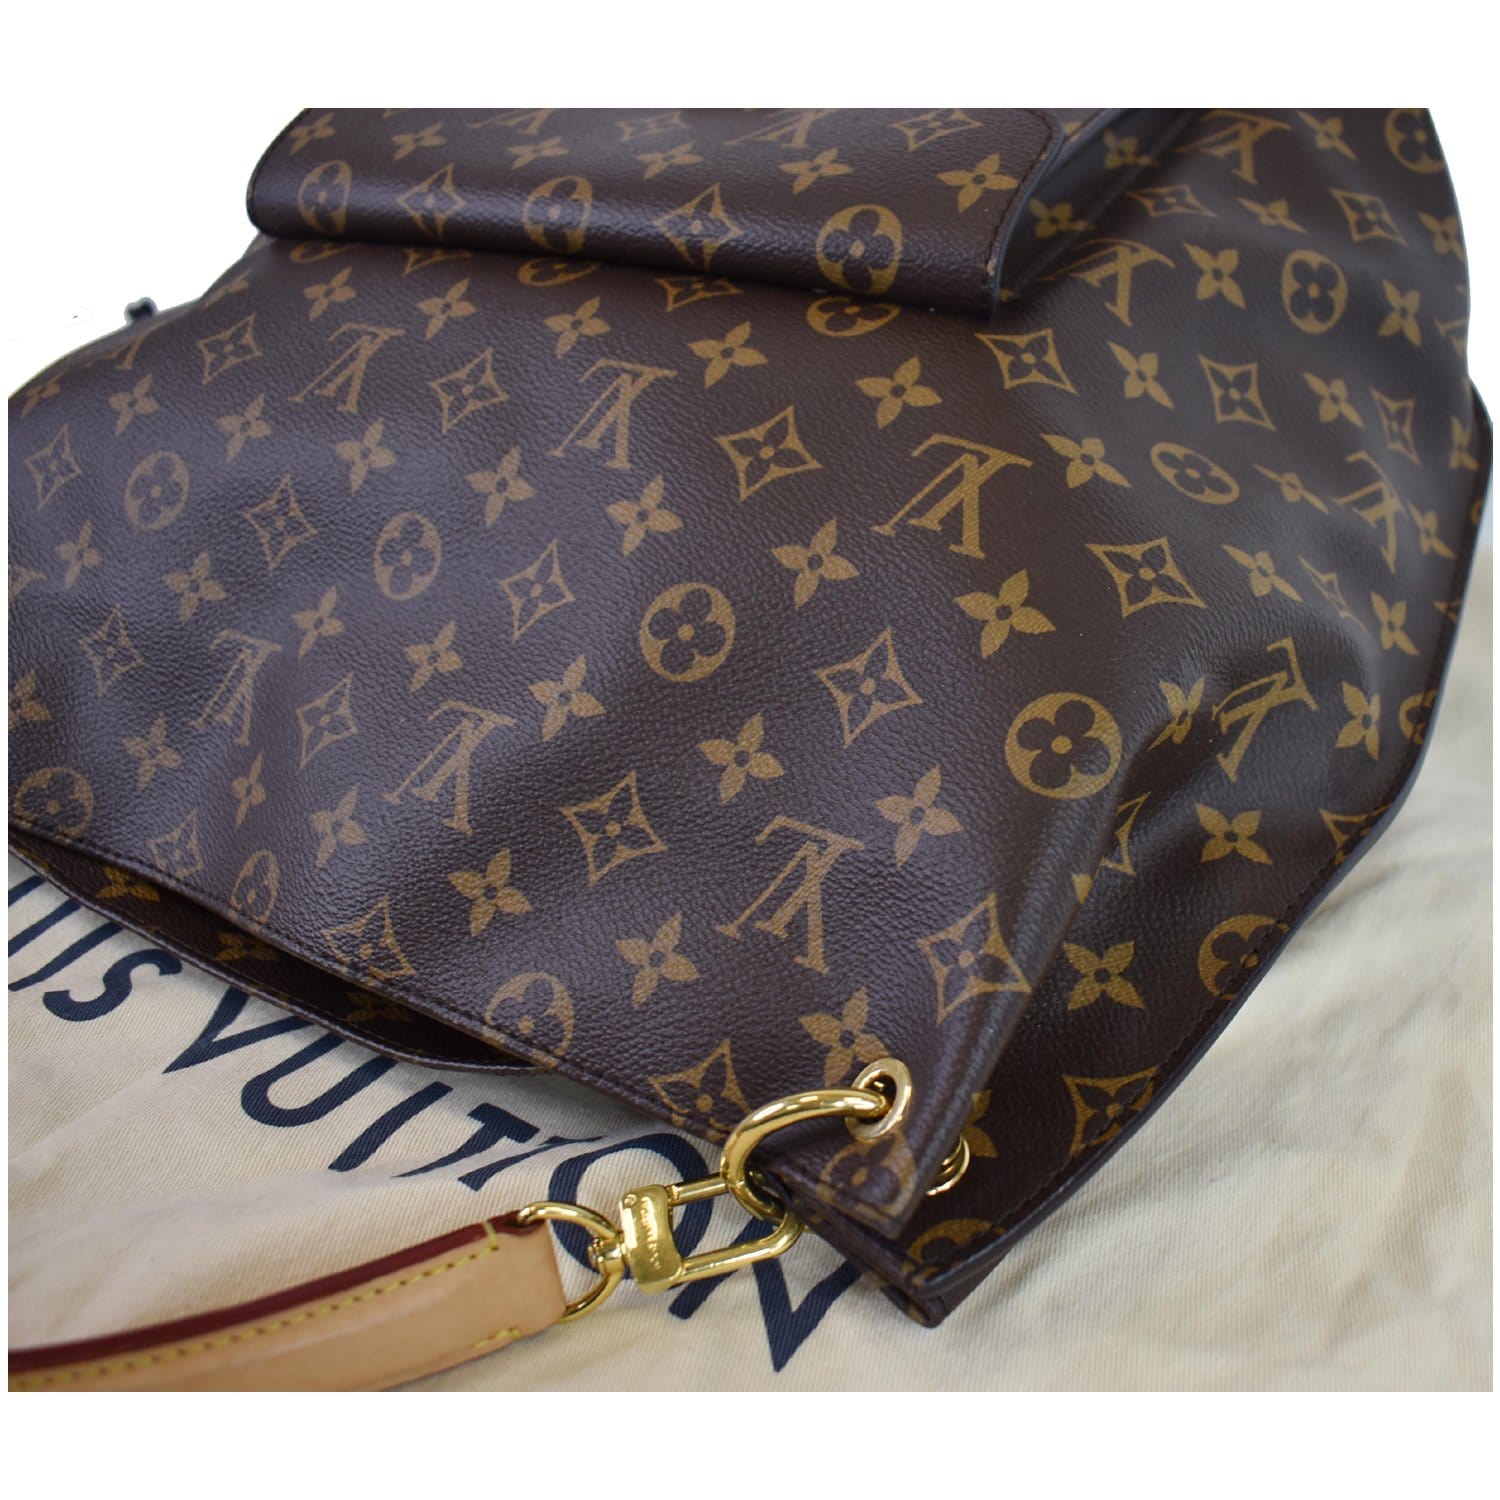 Best or worst hobo style bag from Louis Vuitton? Louis Vuitton Metis Hobo  Review 